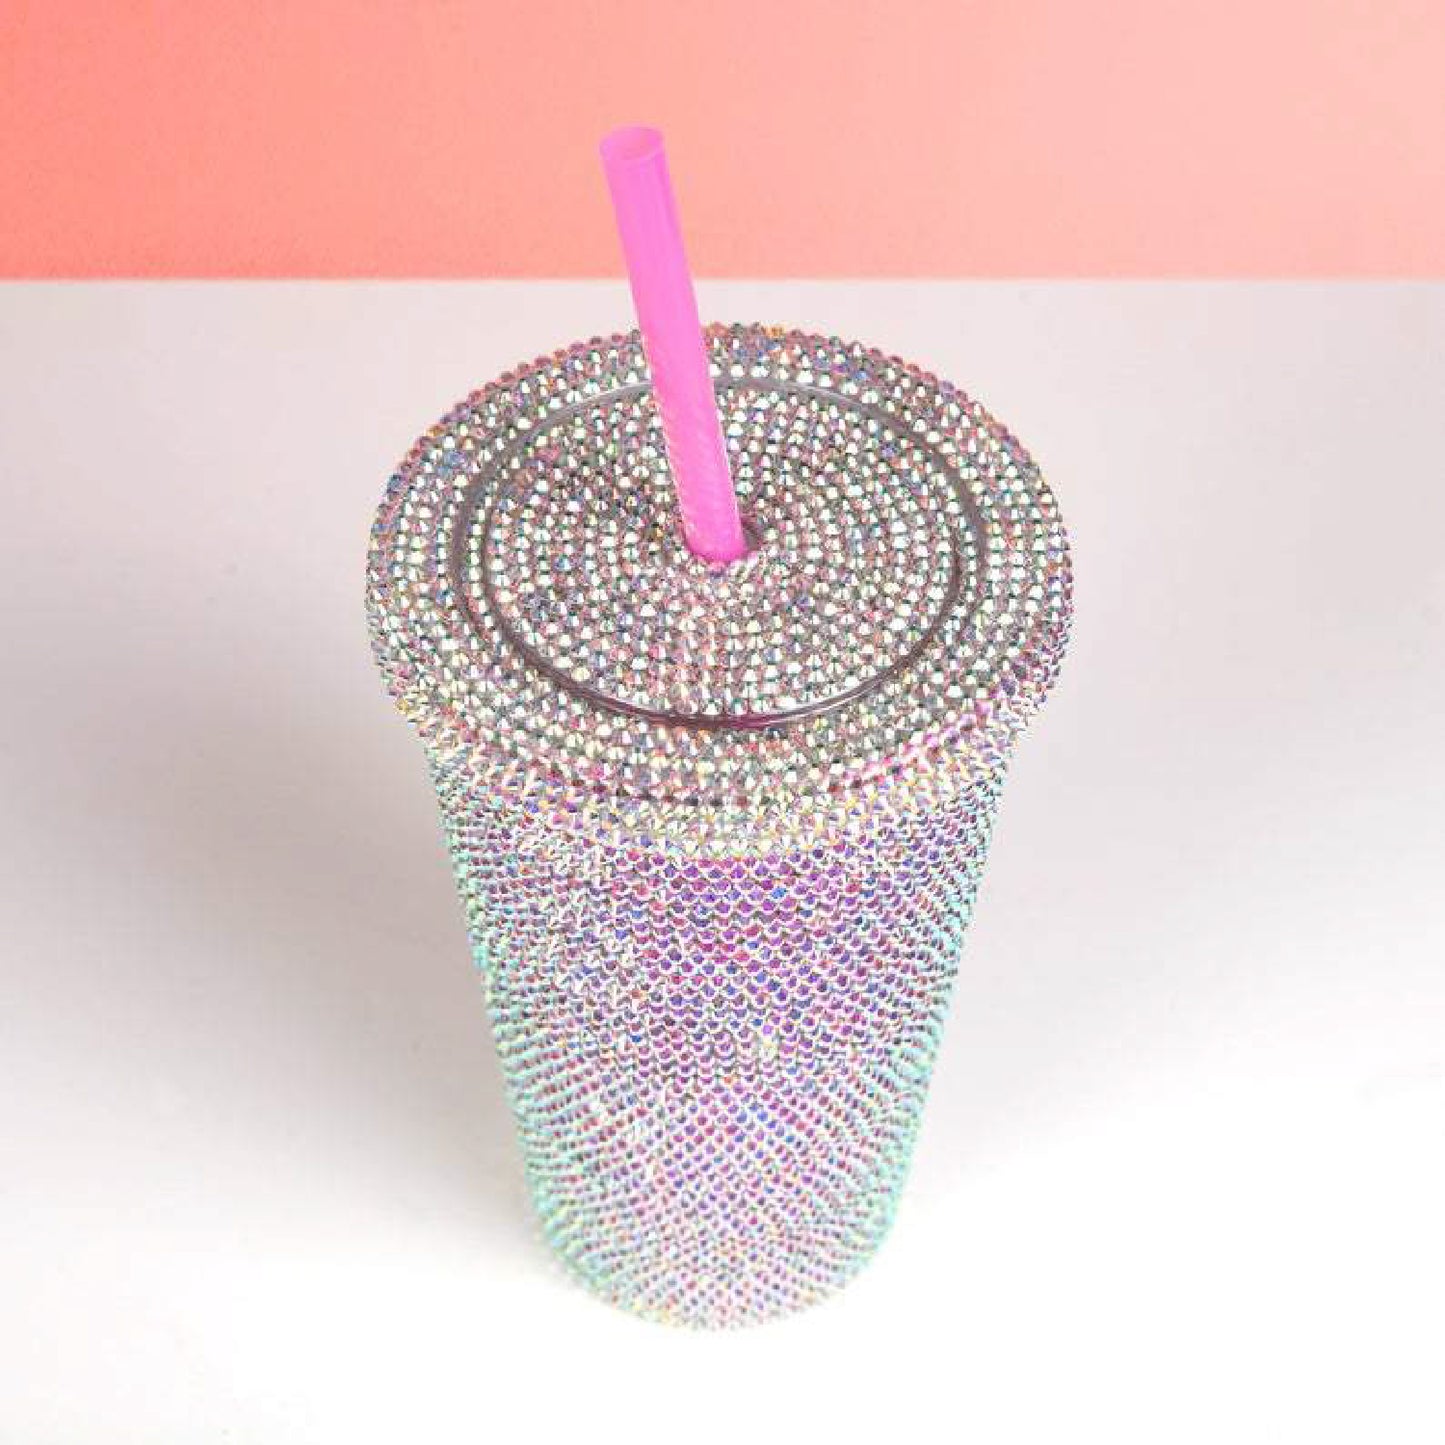 Bling Stainless Steel Tumbler with Straw